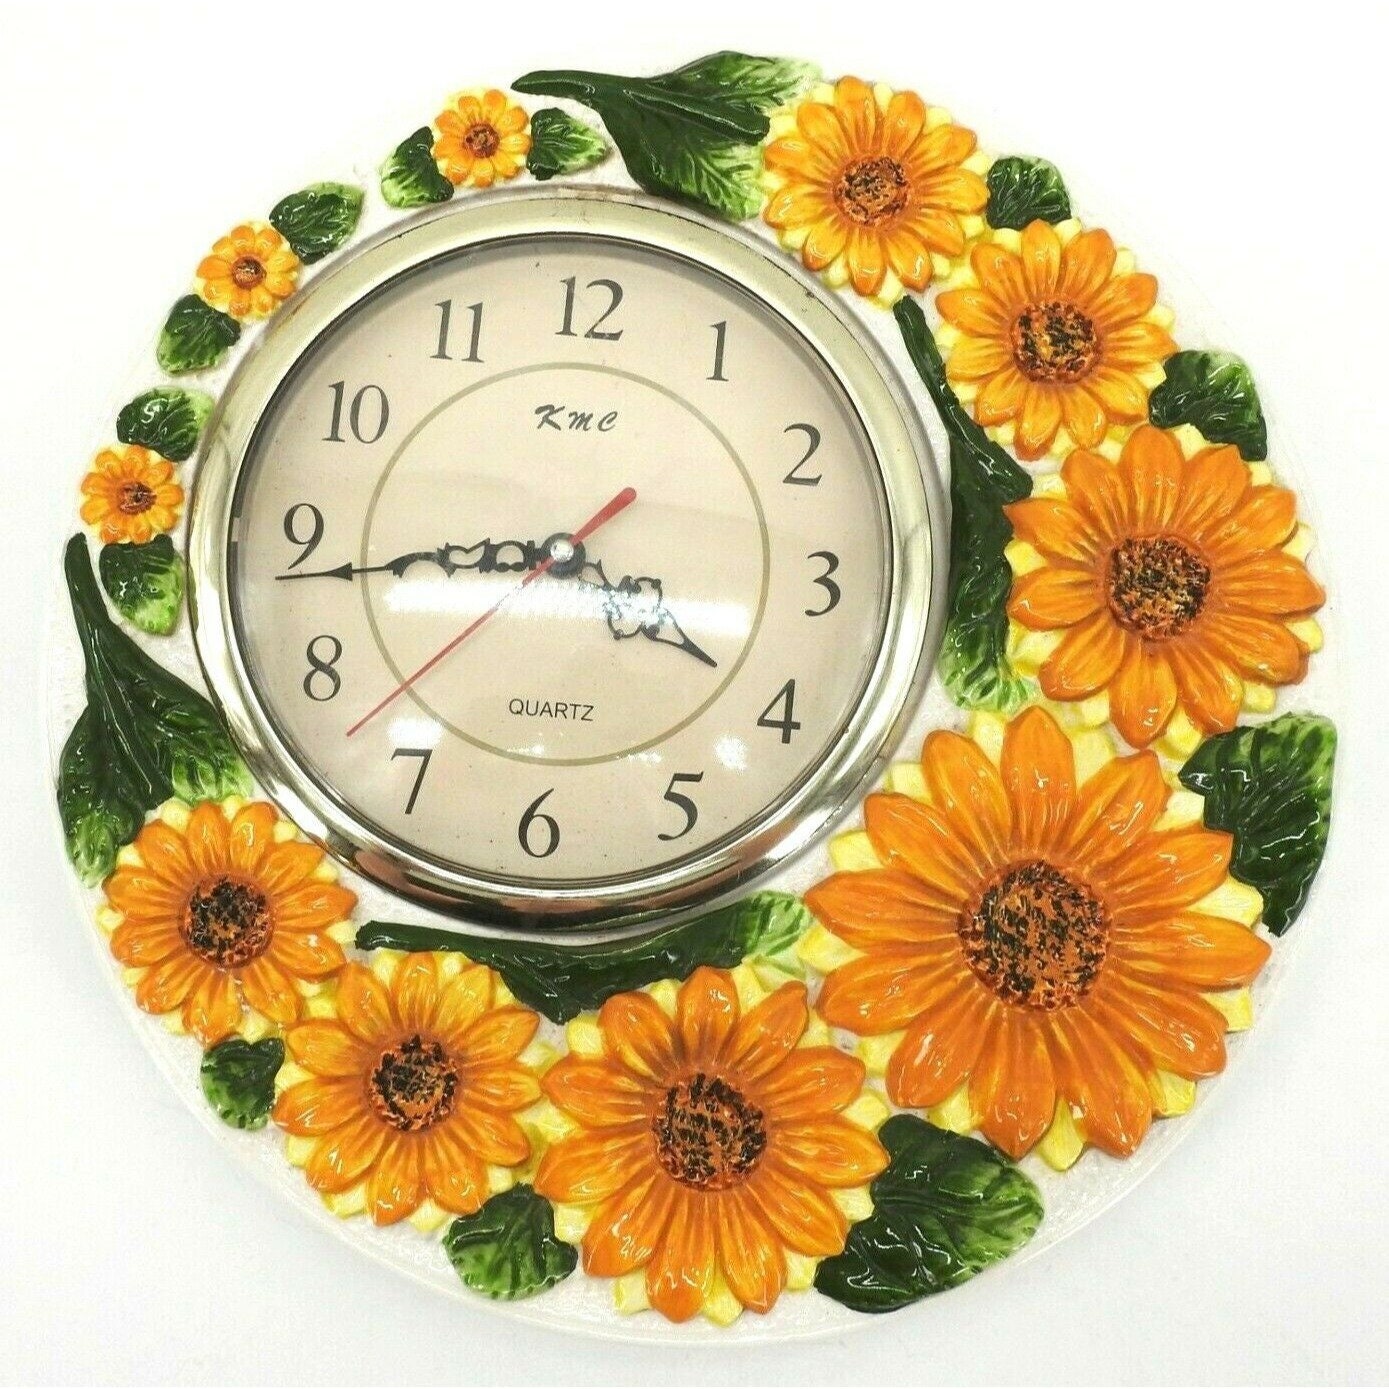 mysticall Wall Clock,30cm Rural Wind Sunflower Wall Clock,Vintage Large Wall Clock for Home Office Classroom 